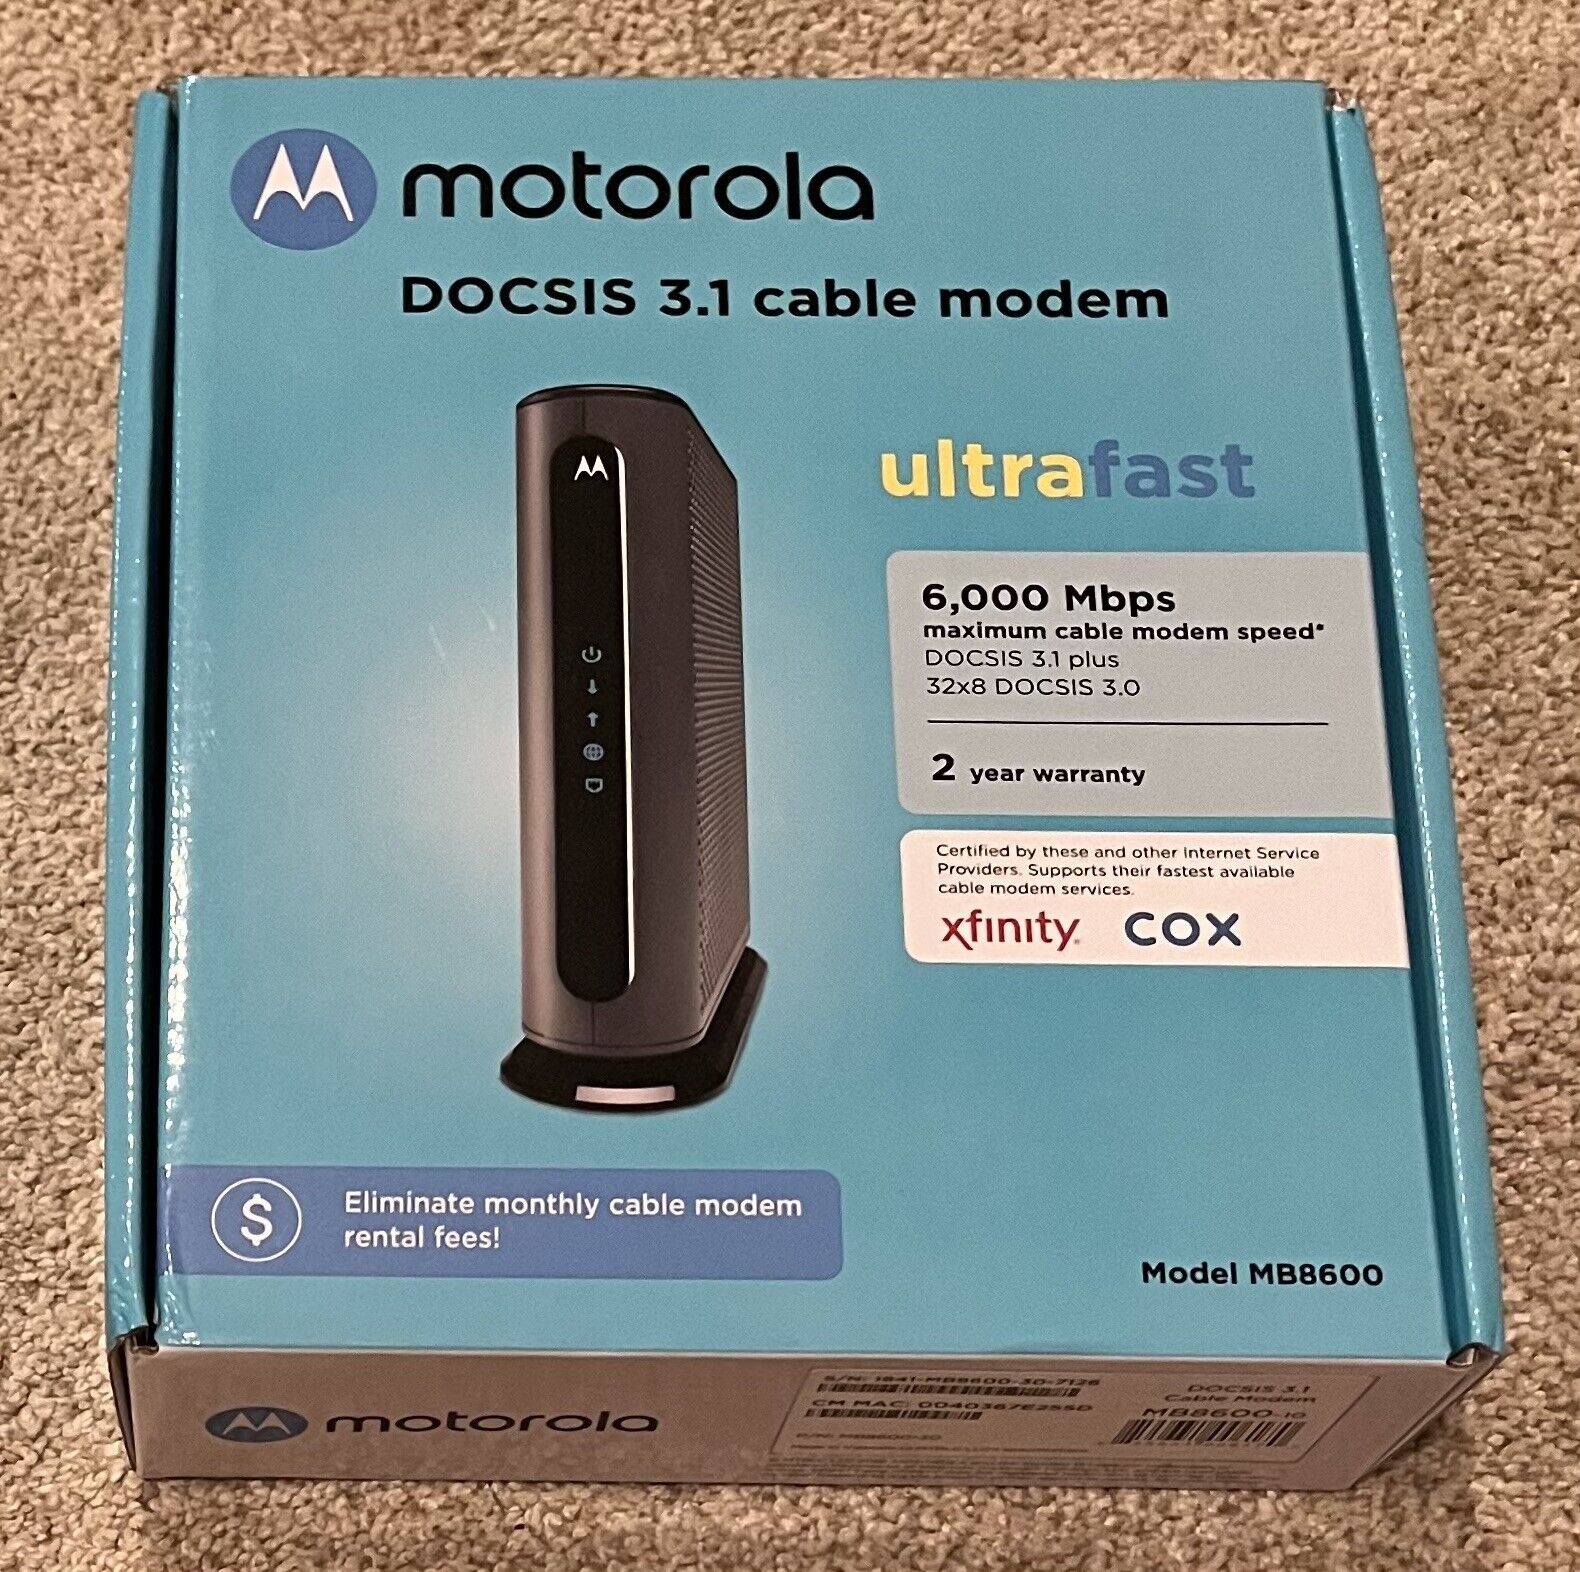 NEW Motorola MB8600 DOCSIS 3.1 Cable Modem IN OPEN BOX - NO POWER CORD OR CABLE